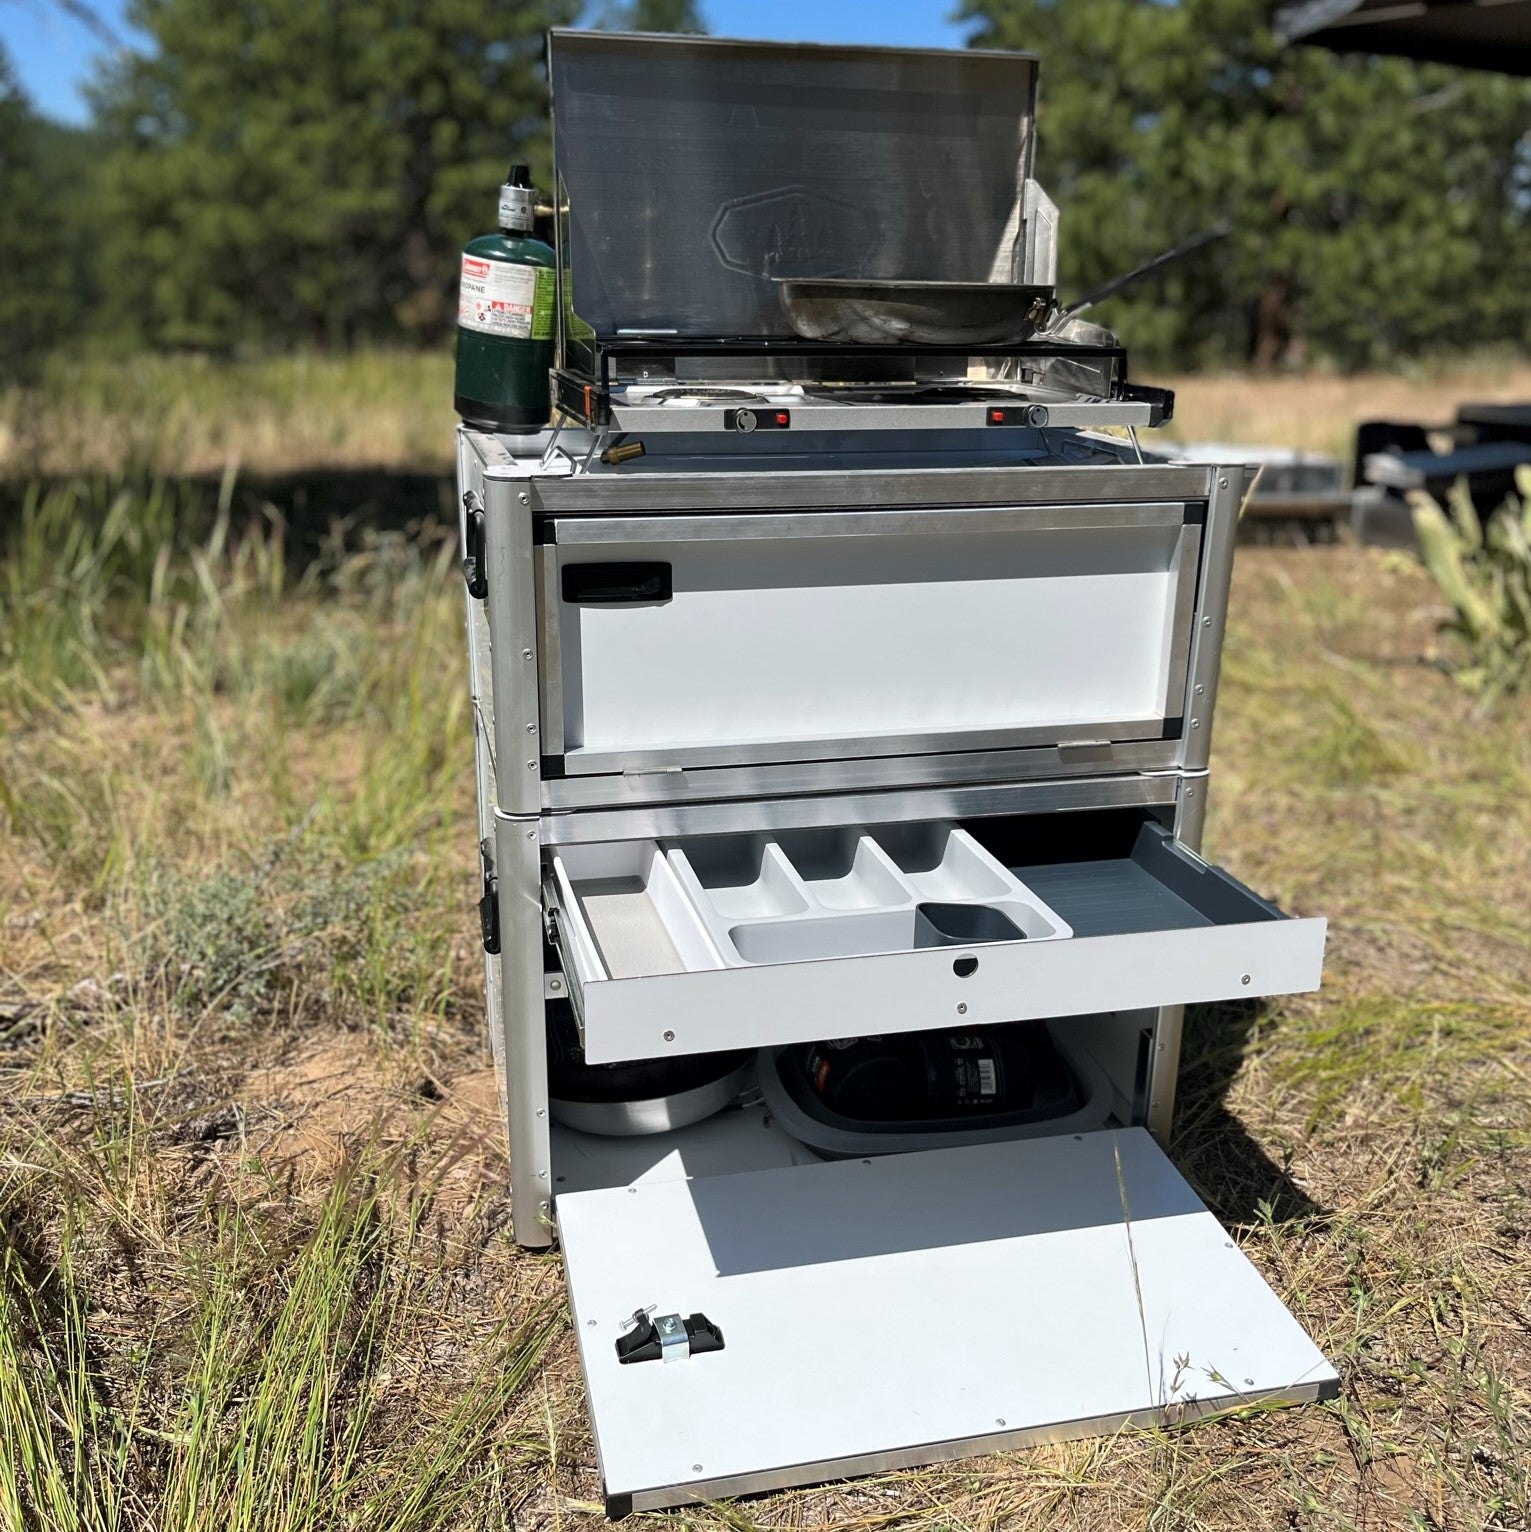 Ultimate Chuck Box Camping Kitchen - Includes Luxury Outdoor